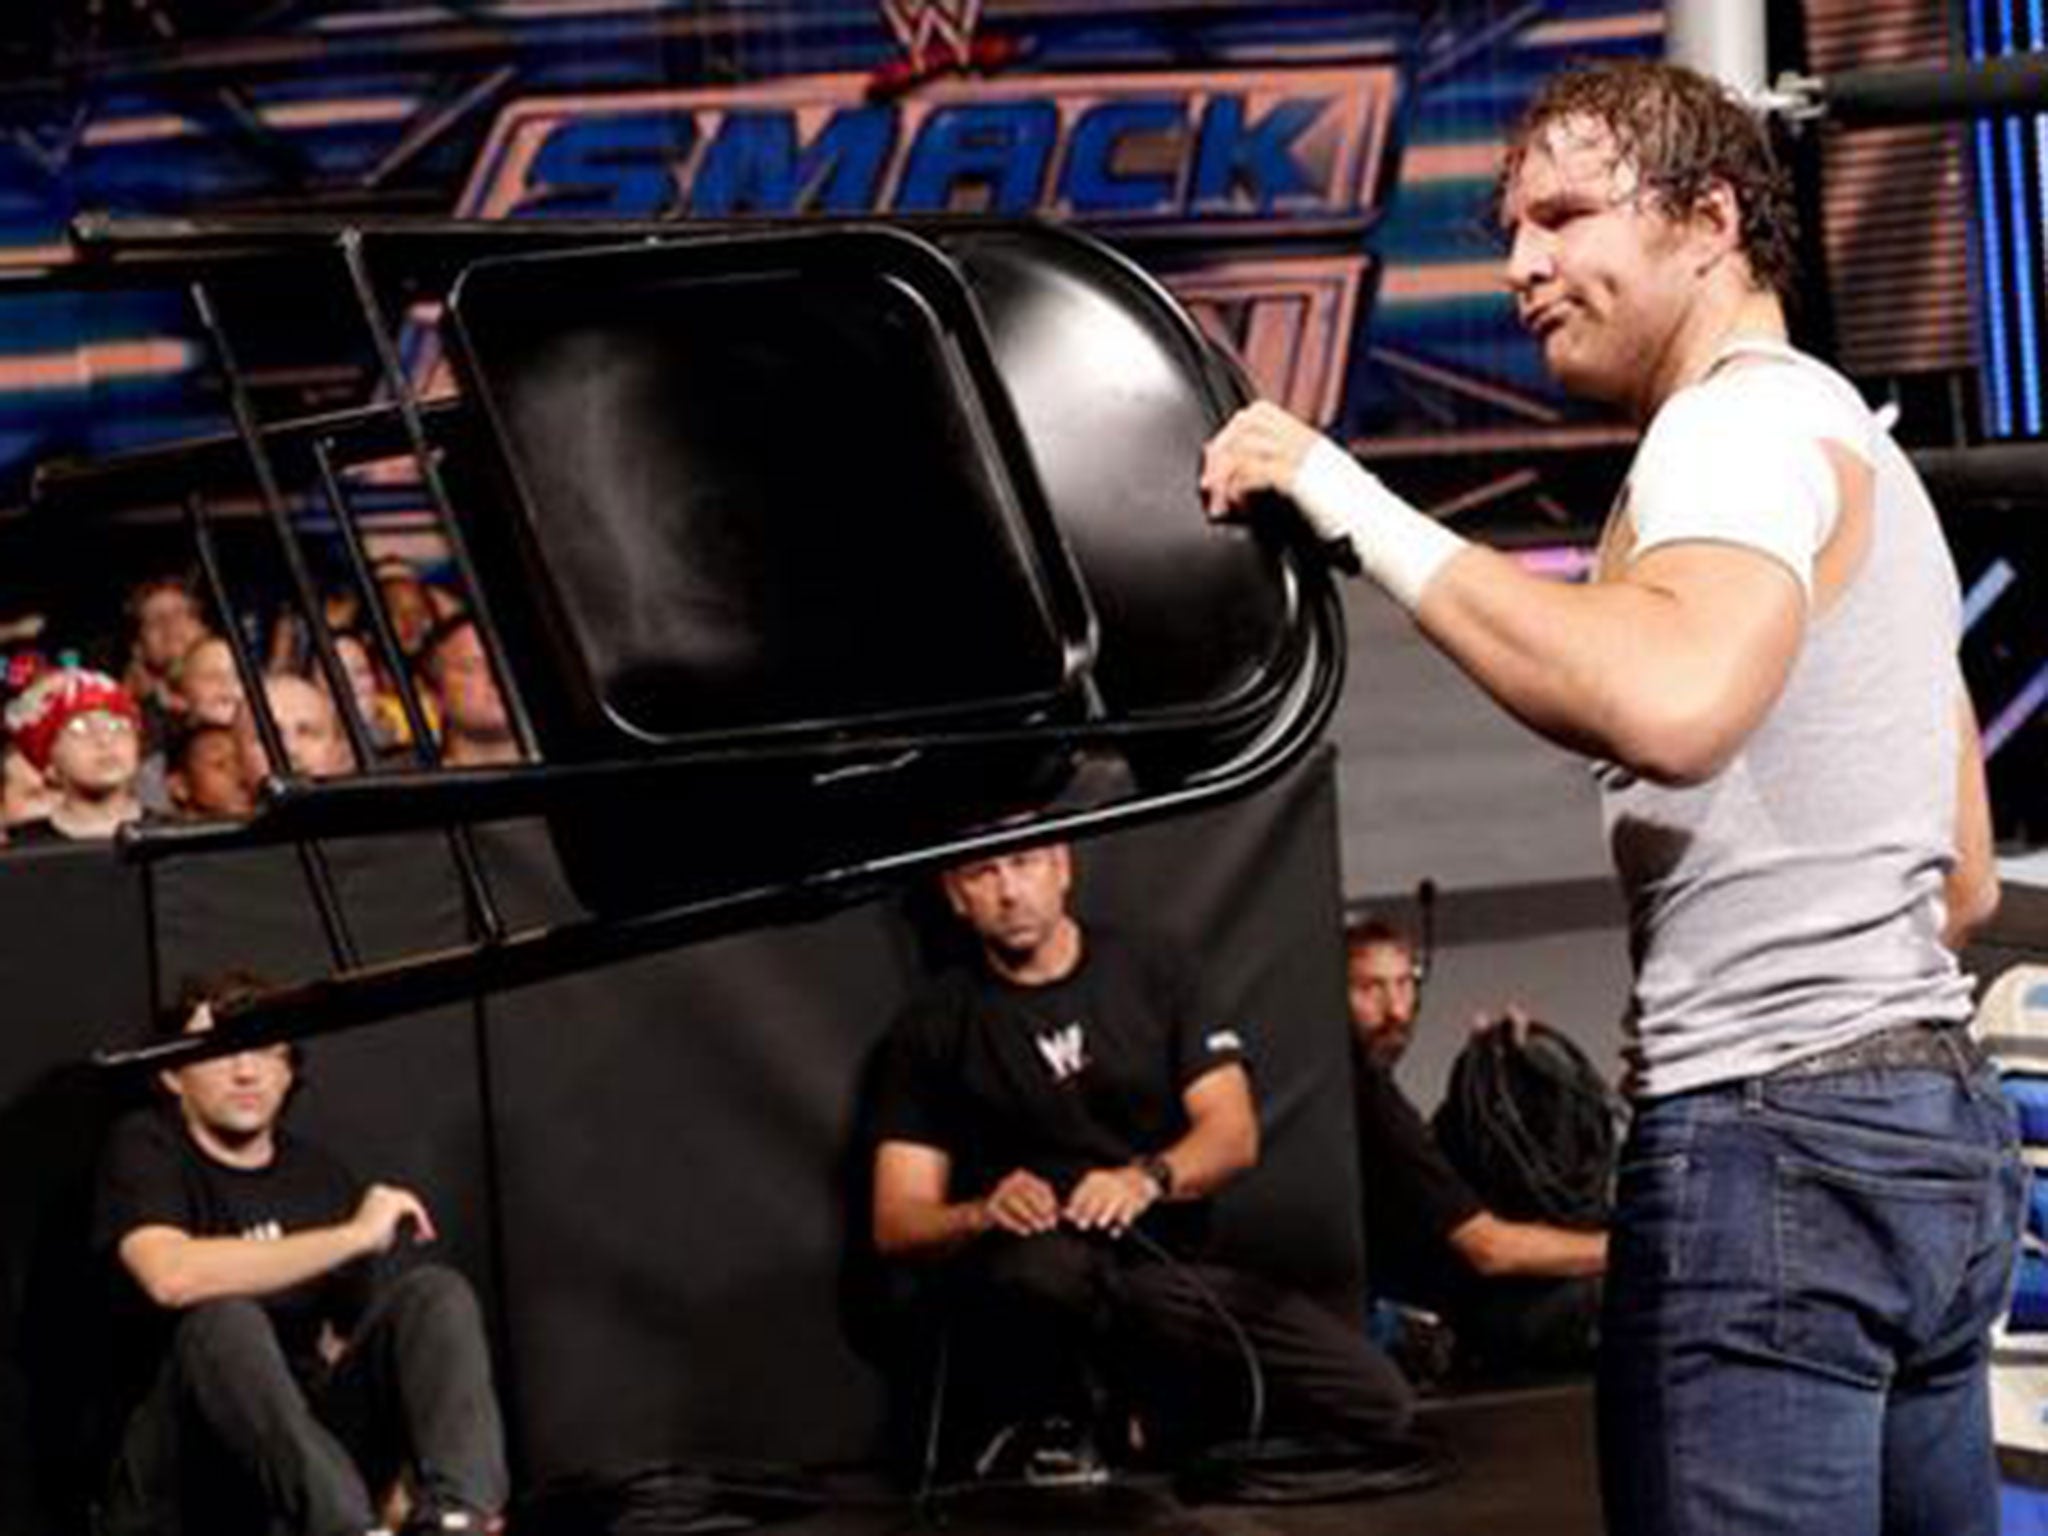 Dean Ambrose uses a chair during his match against Cesaro